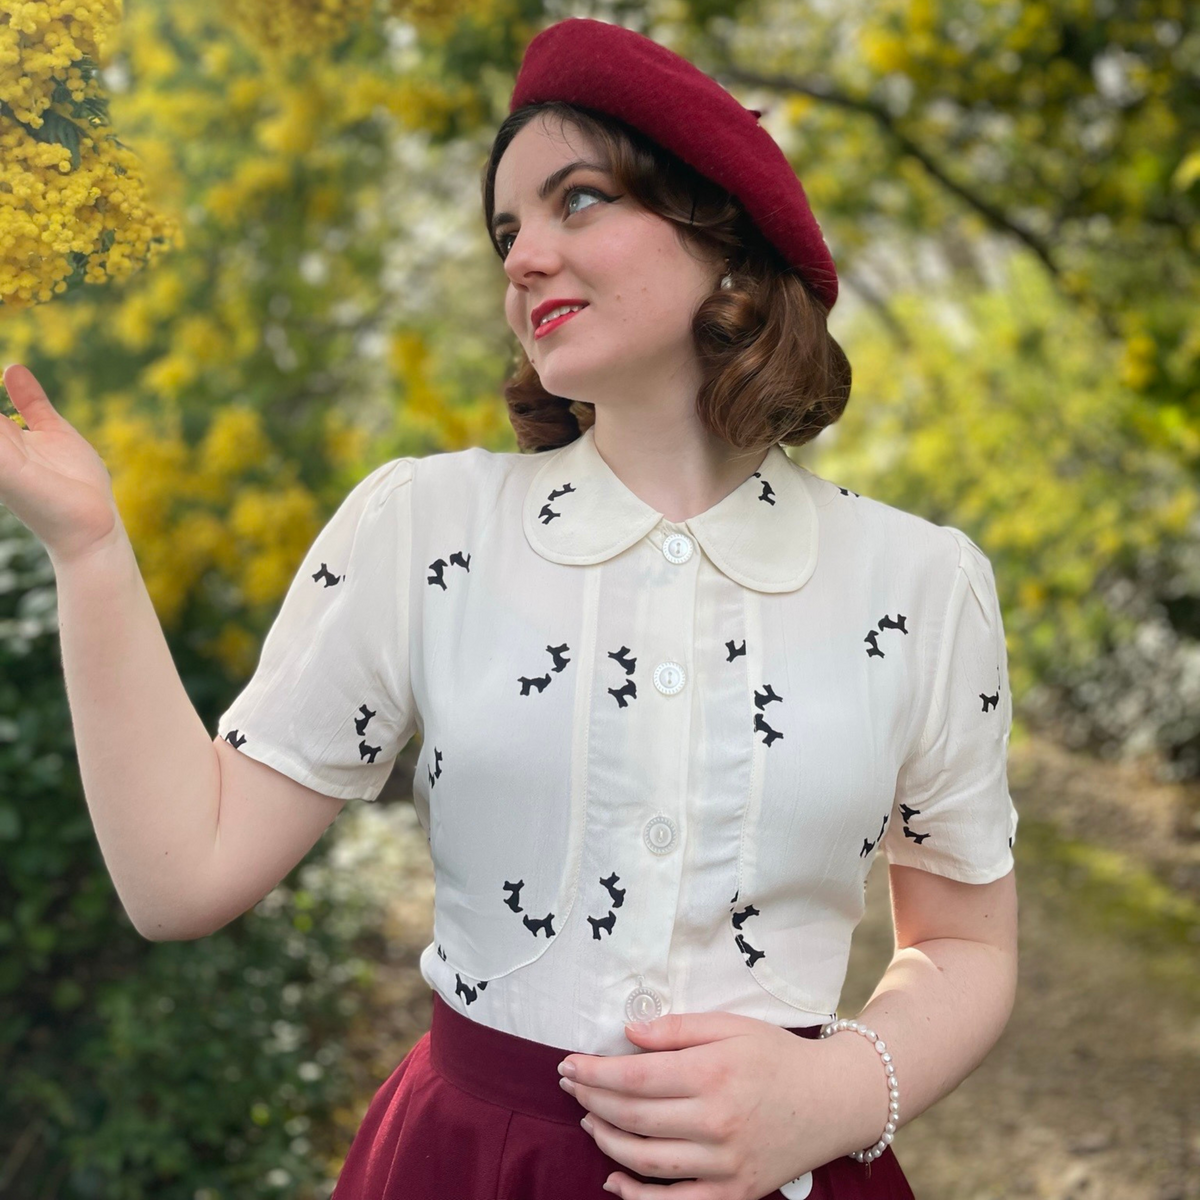 Model wears a 1940s style short sleeve blouse and a burgundy beret. The blouse is cream coloured with small black dogs dotted around the blouse. Featuring a Peter-Pan front collar, buttons down the front, and a tie-waist belt. 